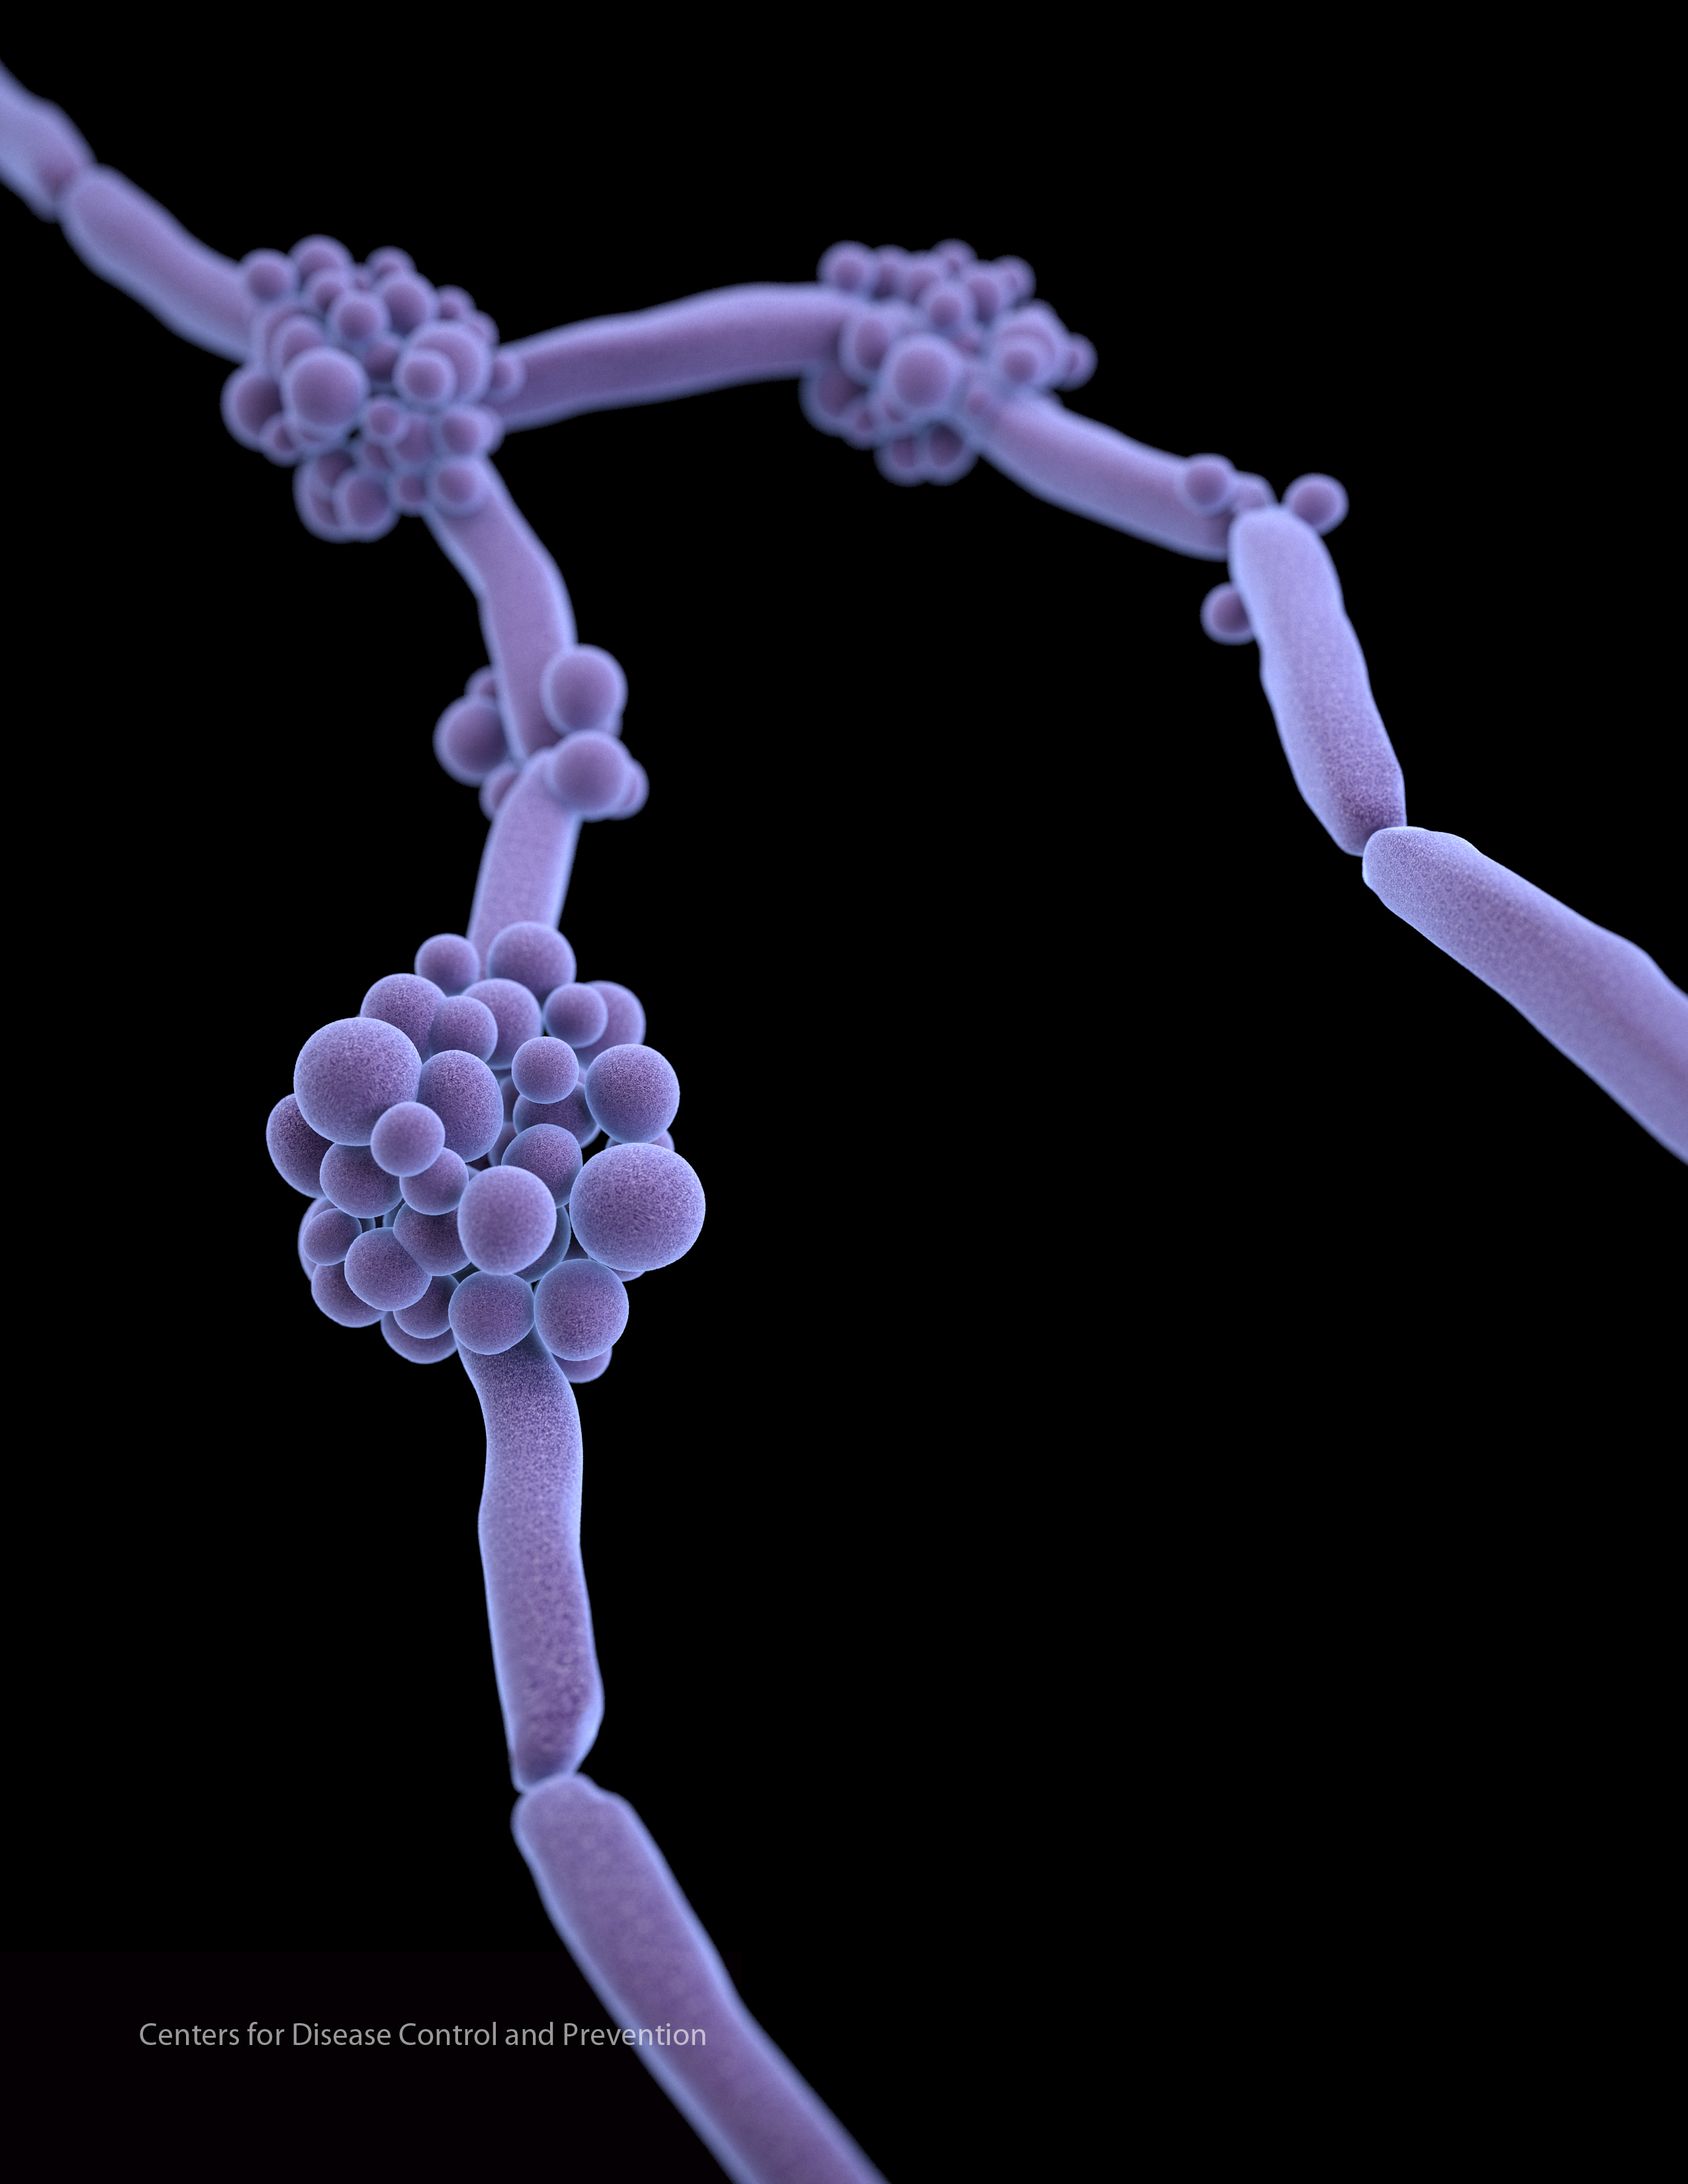 Candida. Content Credit: CDC/James Archer; Photo Credit: U.S. Centers for Disease Control and Prevention - Medical Illustrator